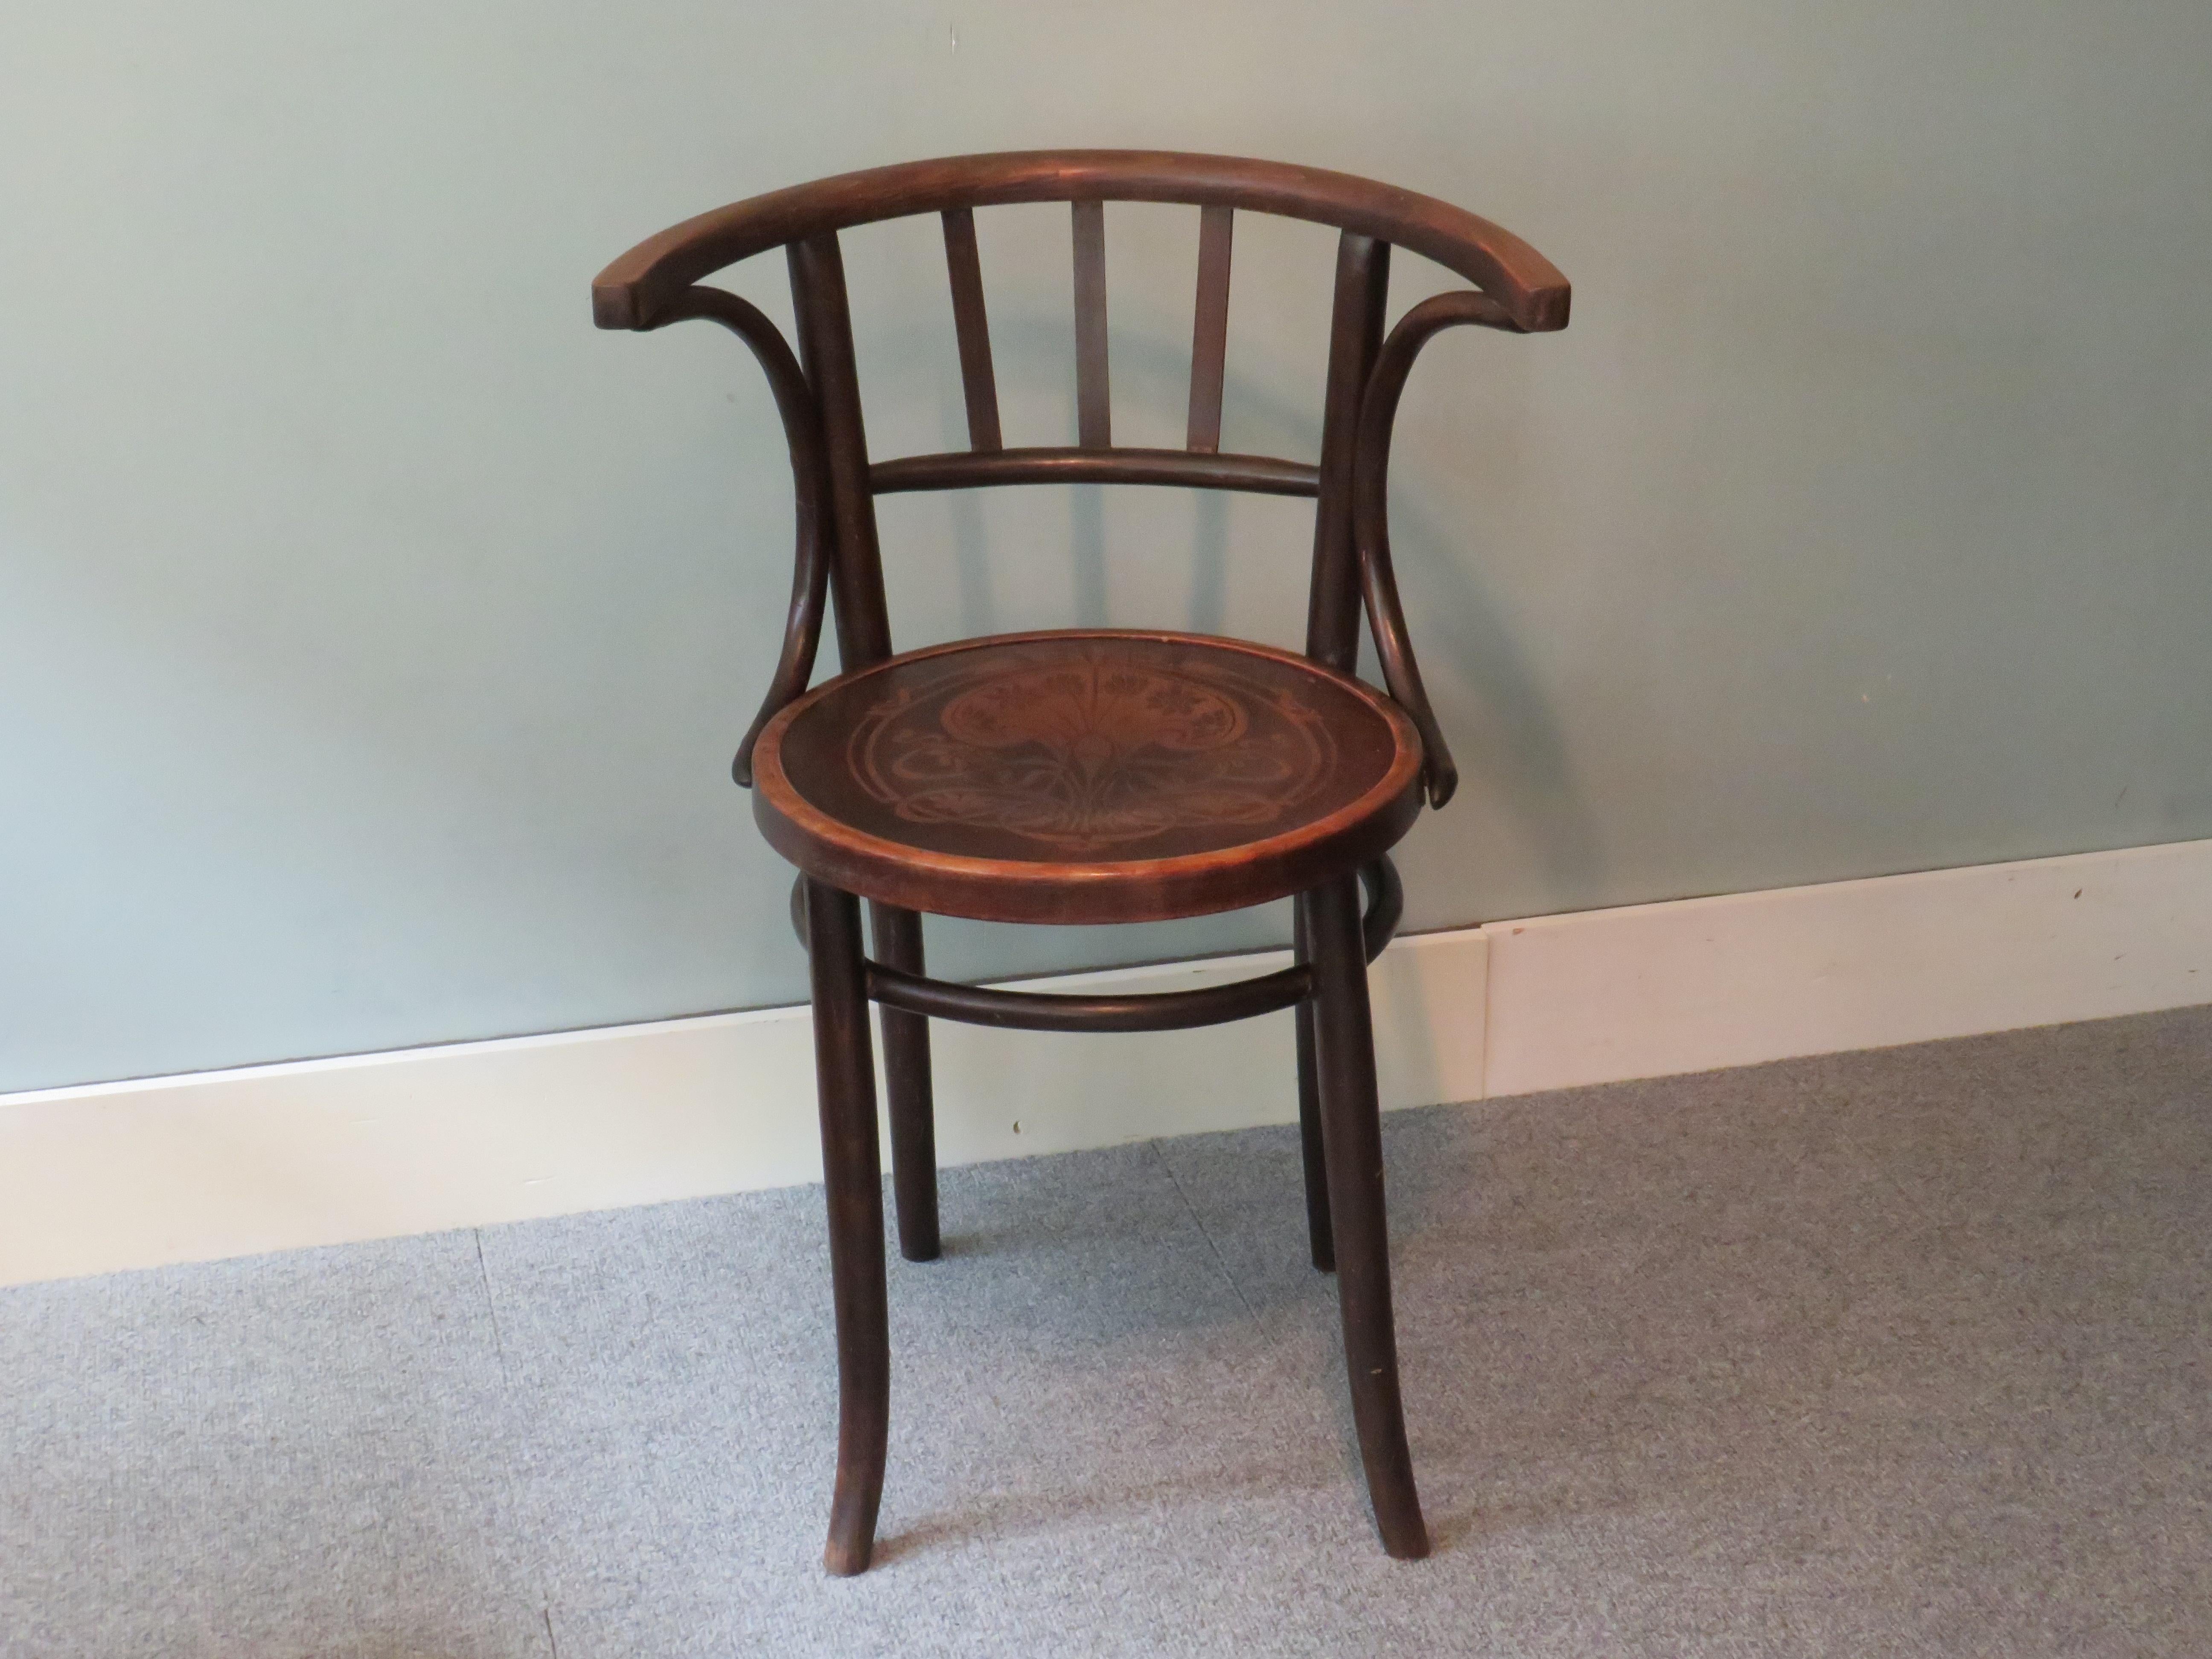 Bentwood Chairs, Early 1900 Attributed to Thonet 1